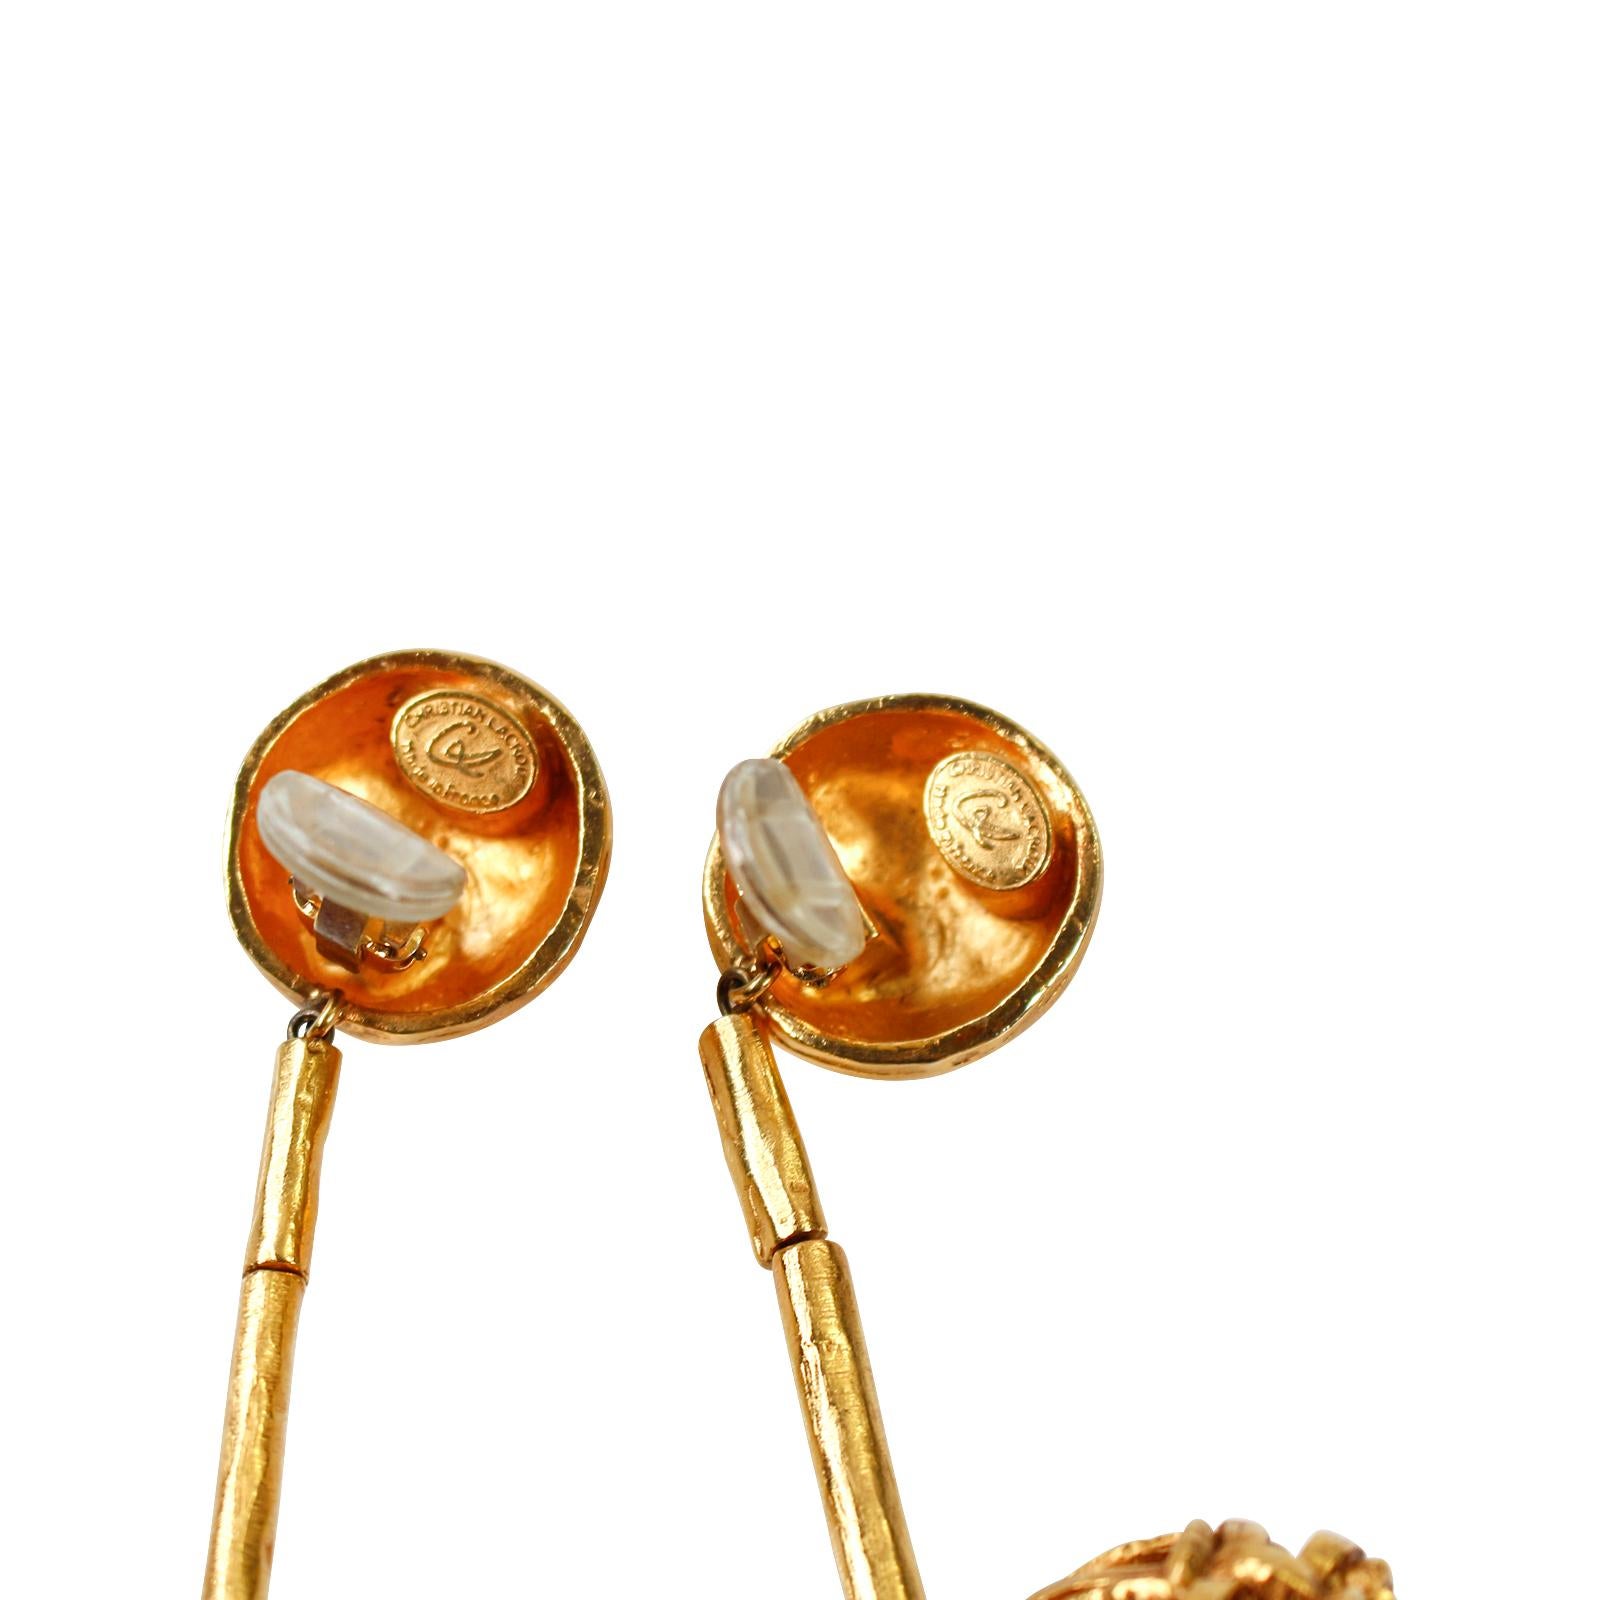 Women's Vintage Christian Lacroix Gold Tone Dangling Ball Earrings, Circa 1990s For Sale